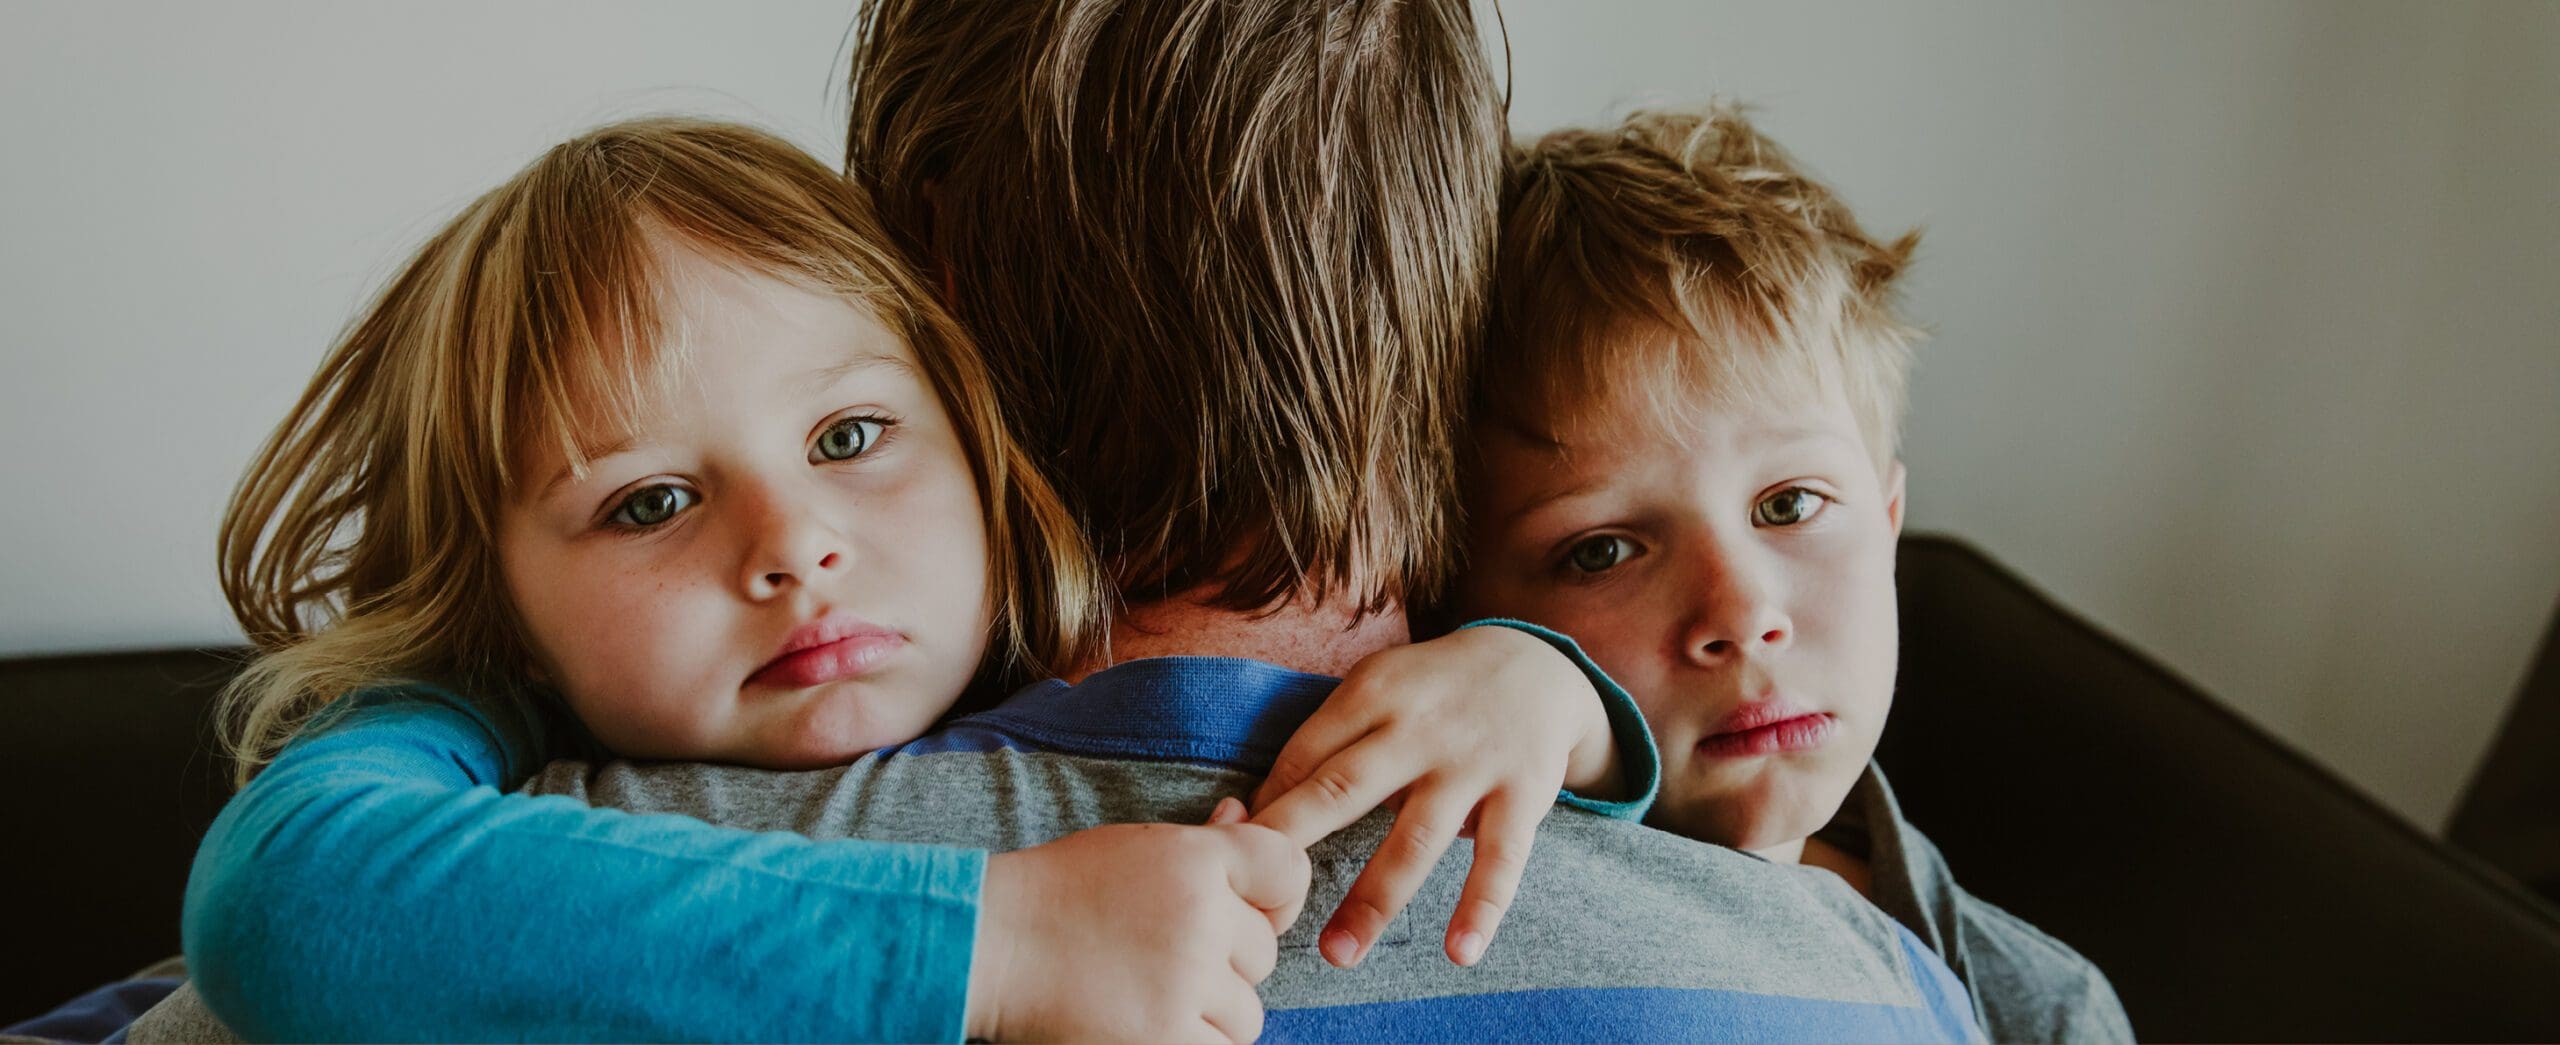 Parslows for Family Law - Jersey Divorce Aid - Fixed Fee Packages